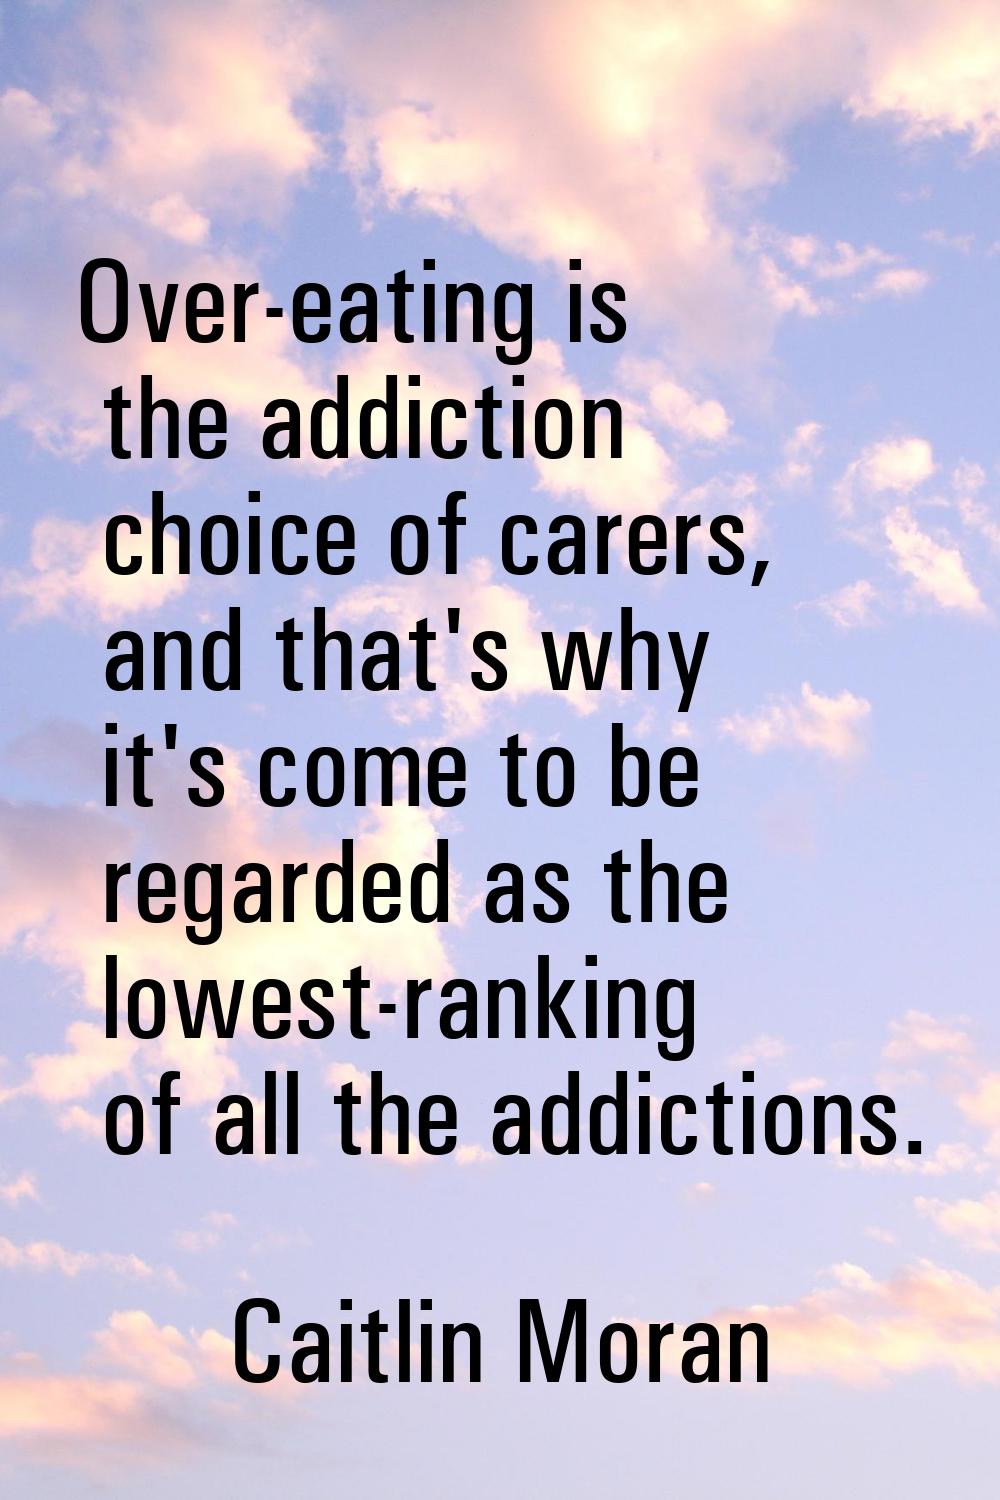 Over-eating is the addiction choice of carers, and that's why it's come to be regarded as the lowes